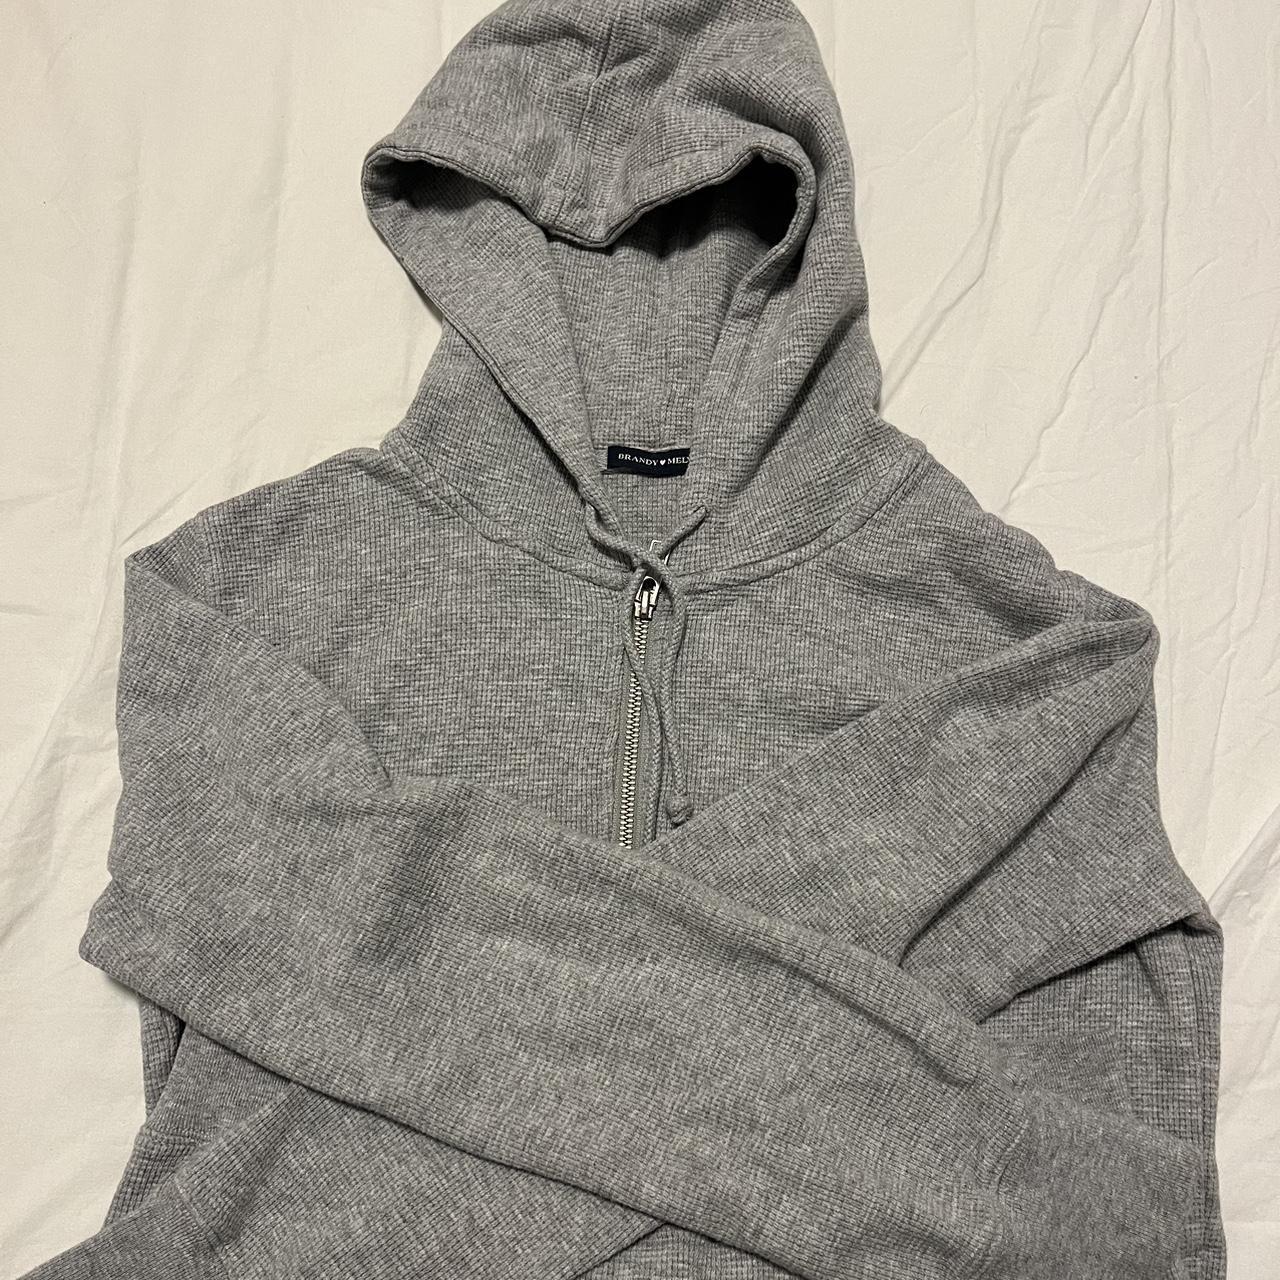 Brandy Melville Christy Waffle Hoodie in the colour - Depop